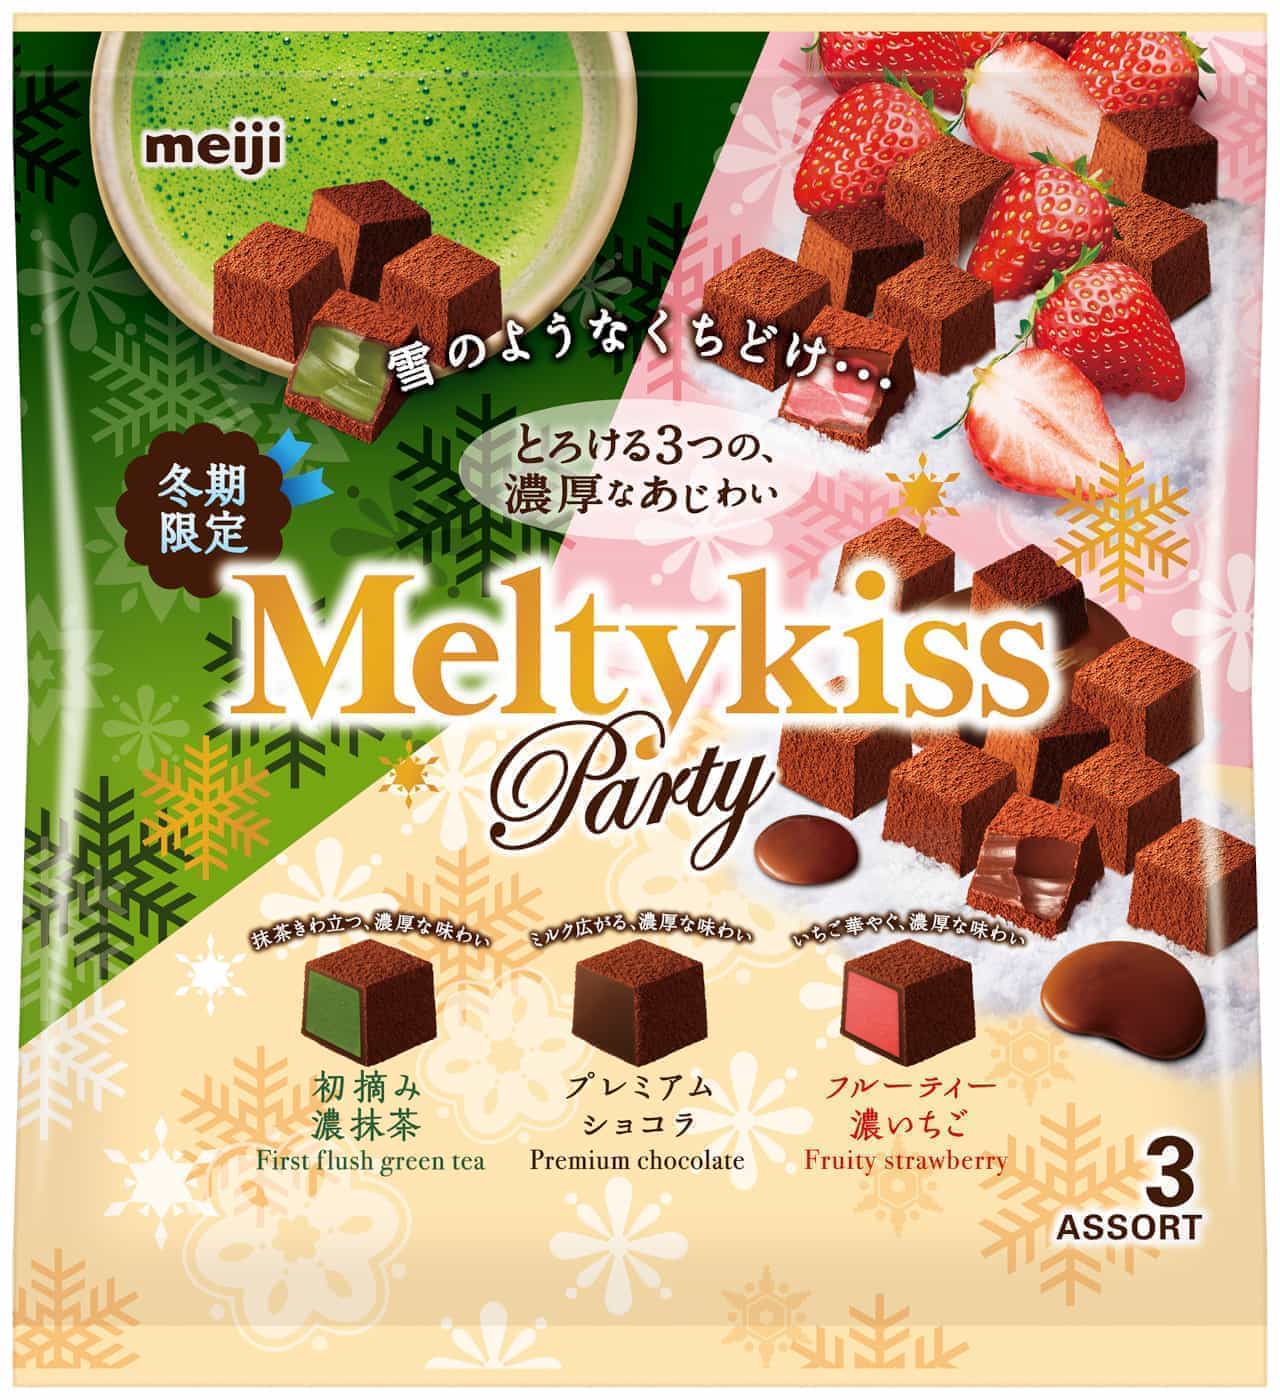 "Melty Kiss Party Assorted Bags" for winter only